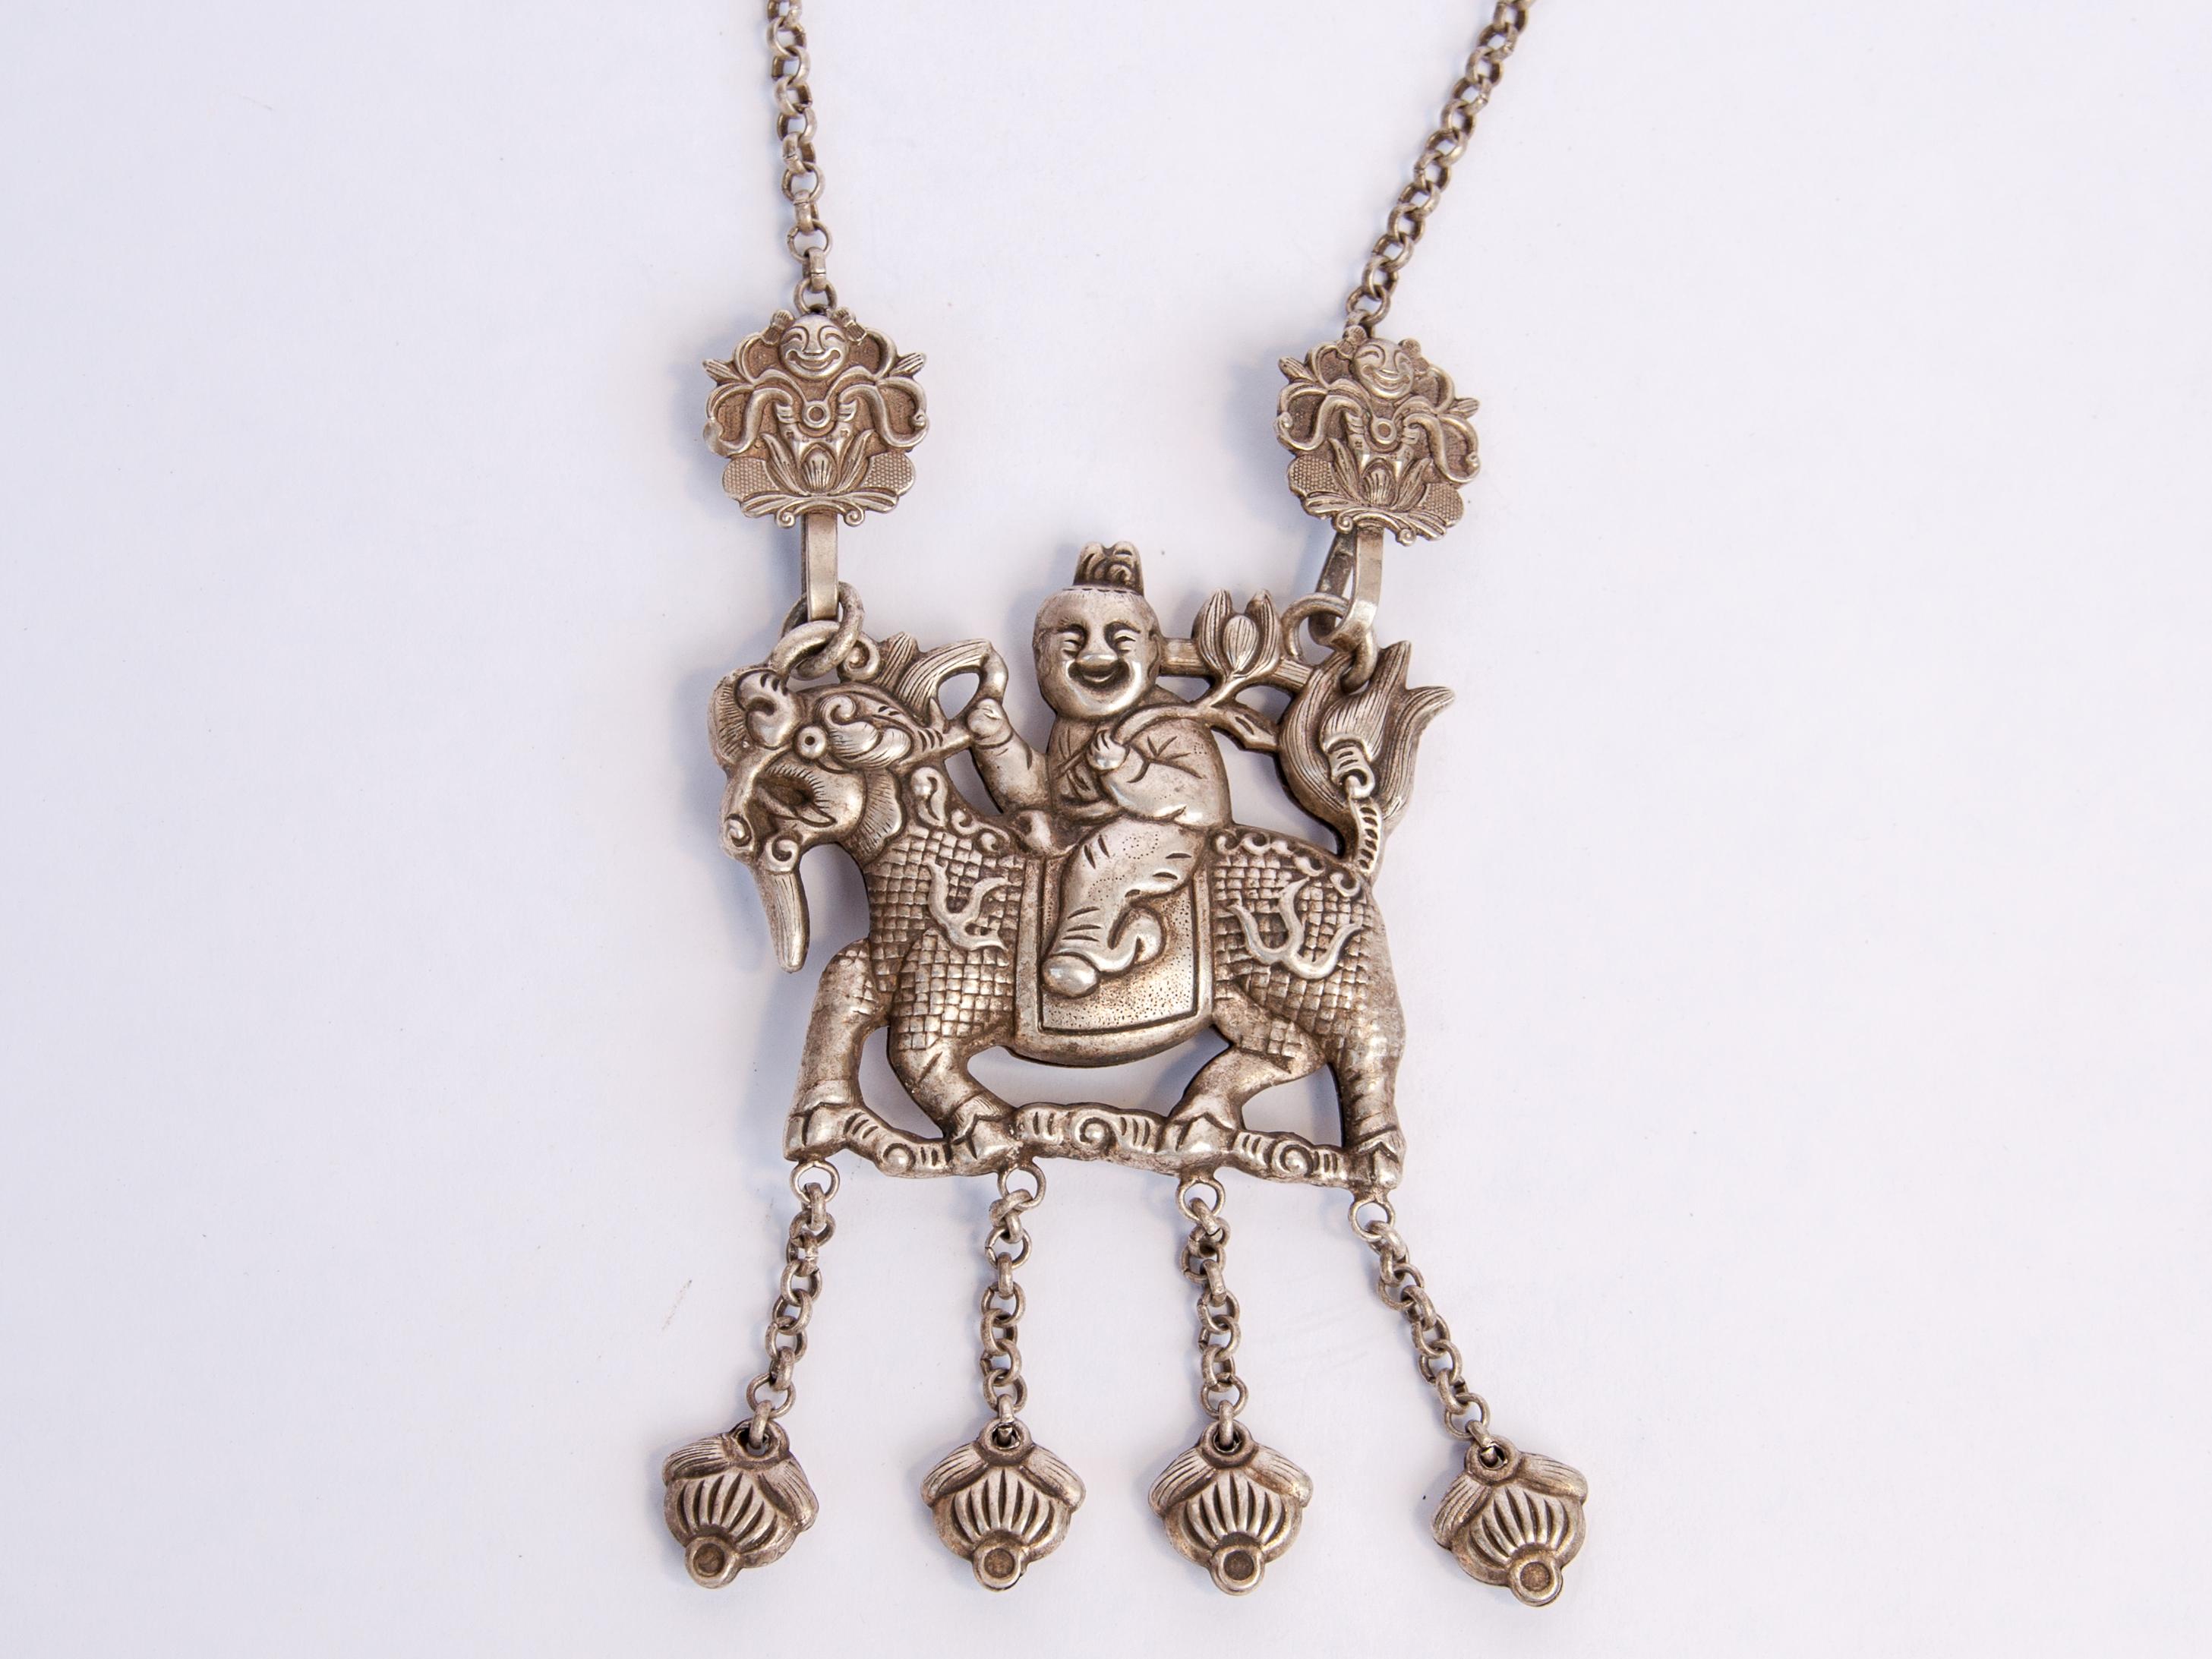 Qilin amulet necklace with infant rider, silver alloy with repousse work and hanging bells. Southwest China, early 20th century. Fastened on a chain necklace.
This lovingly worked amulet necklace depicts an infant mounted upon a Qilin. In his hand